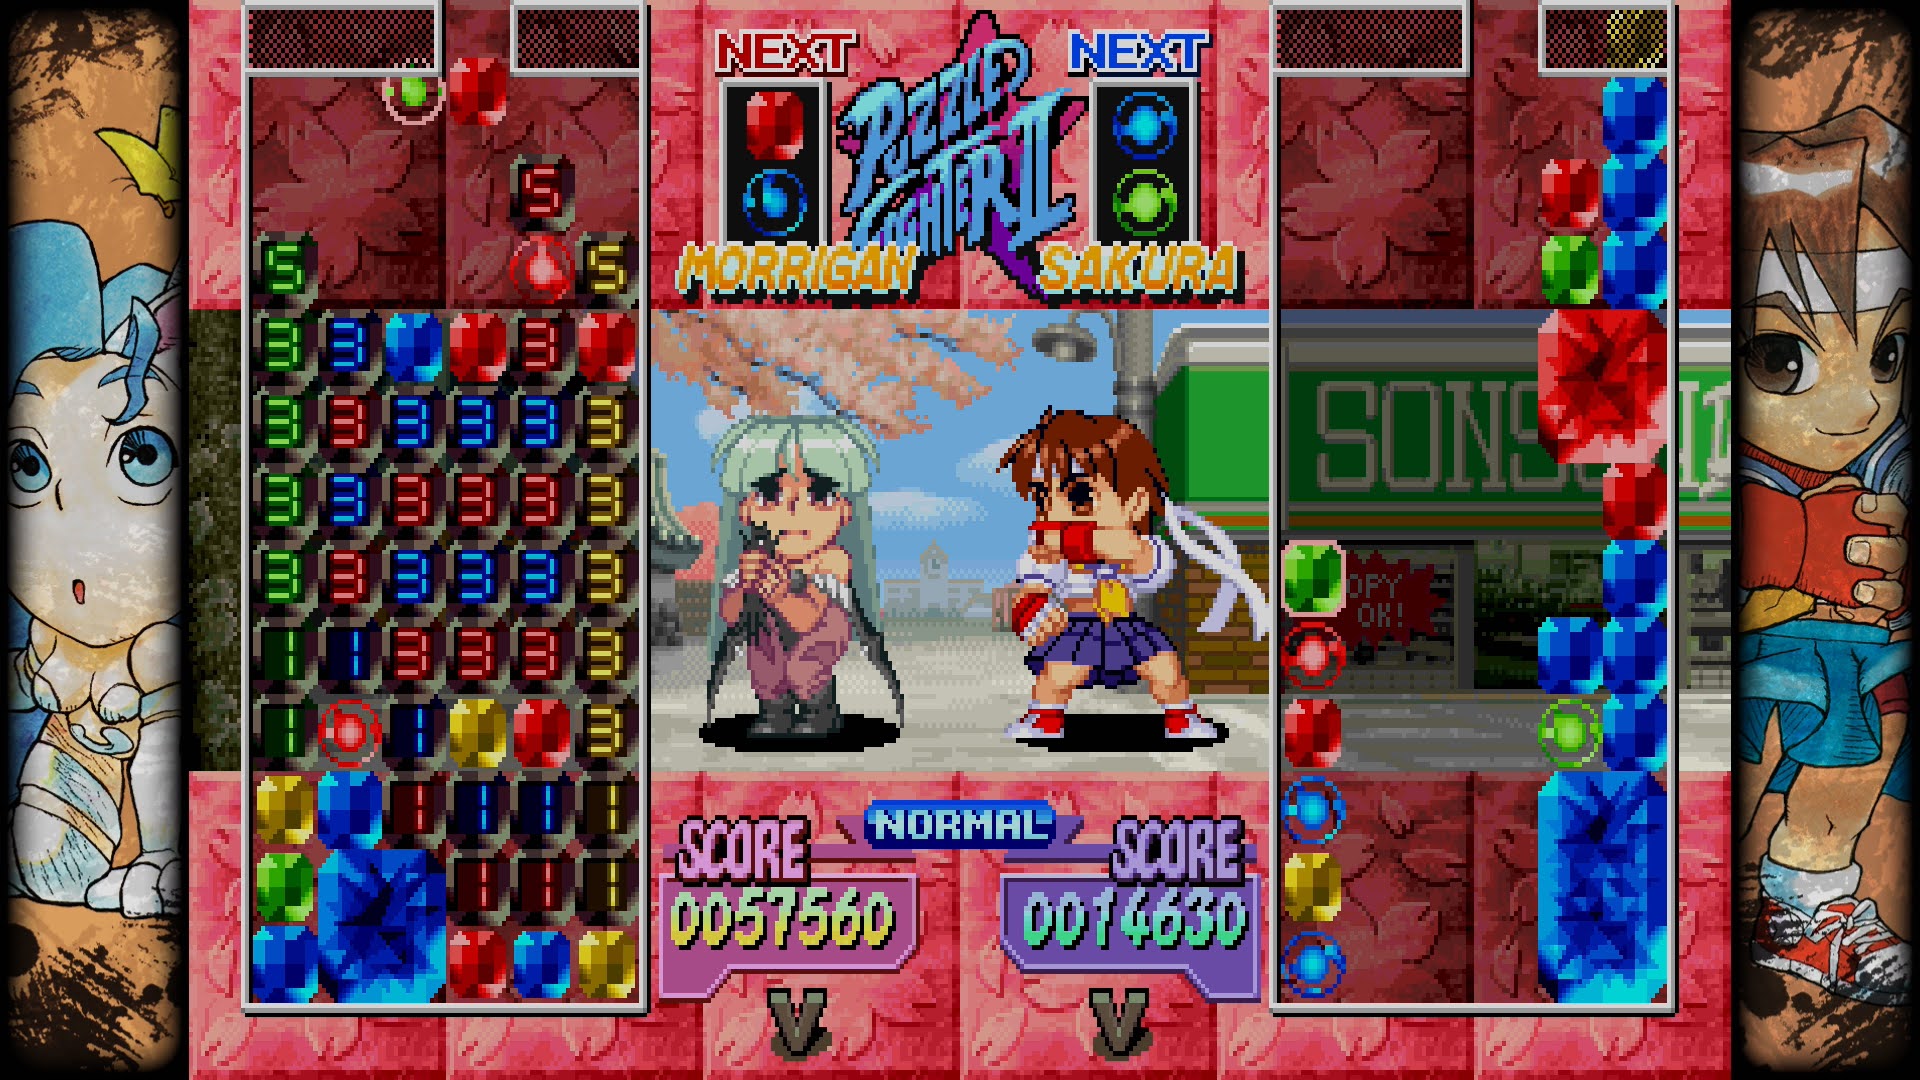 Super Puzzle Fighter II Turbo  Manual online oficial do Capcom Fighting  Collection